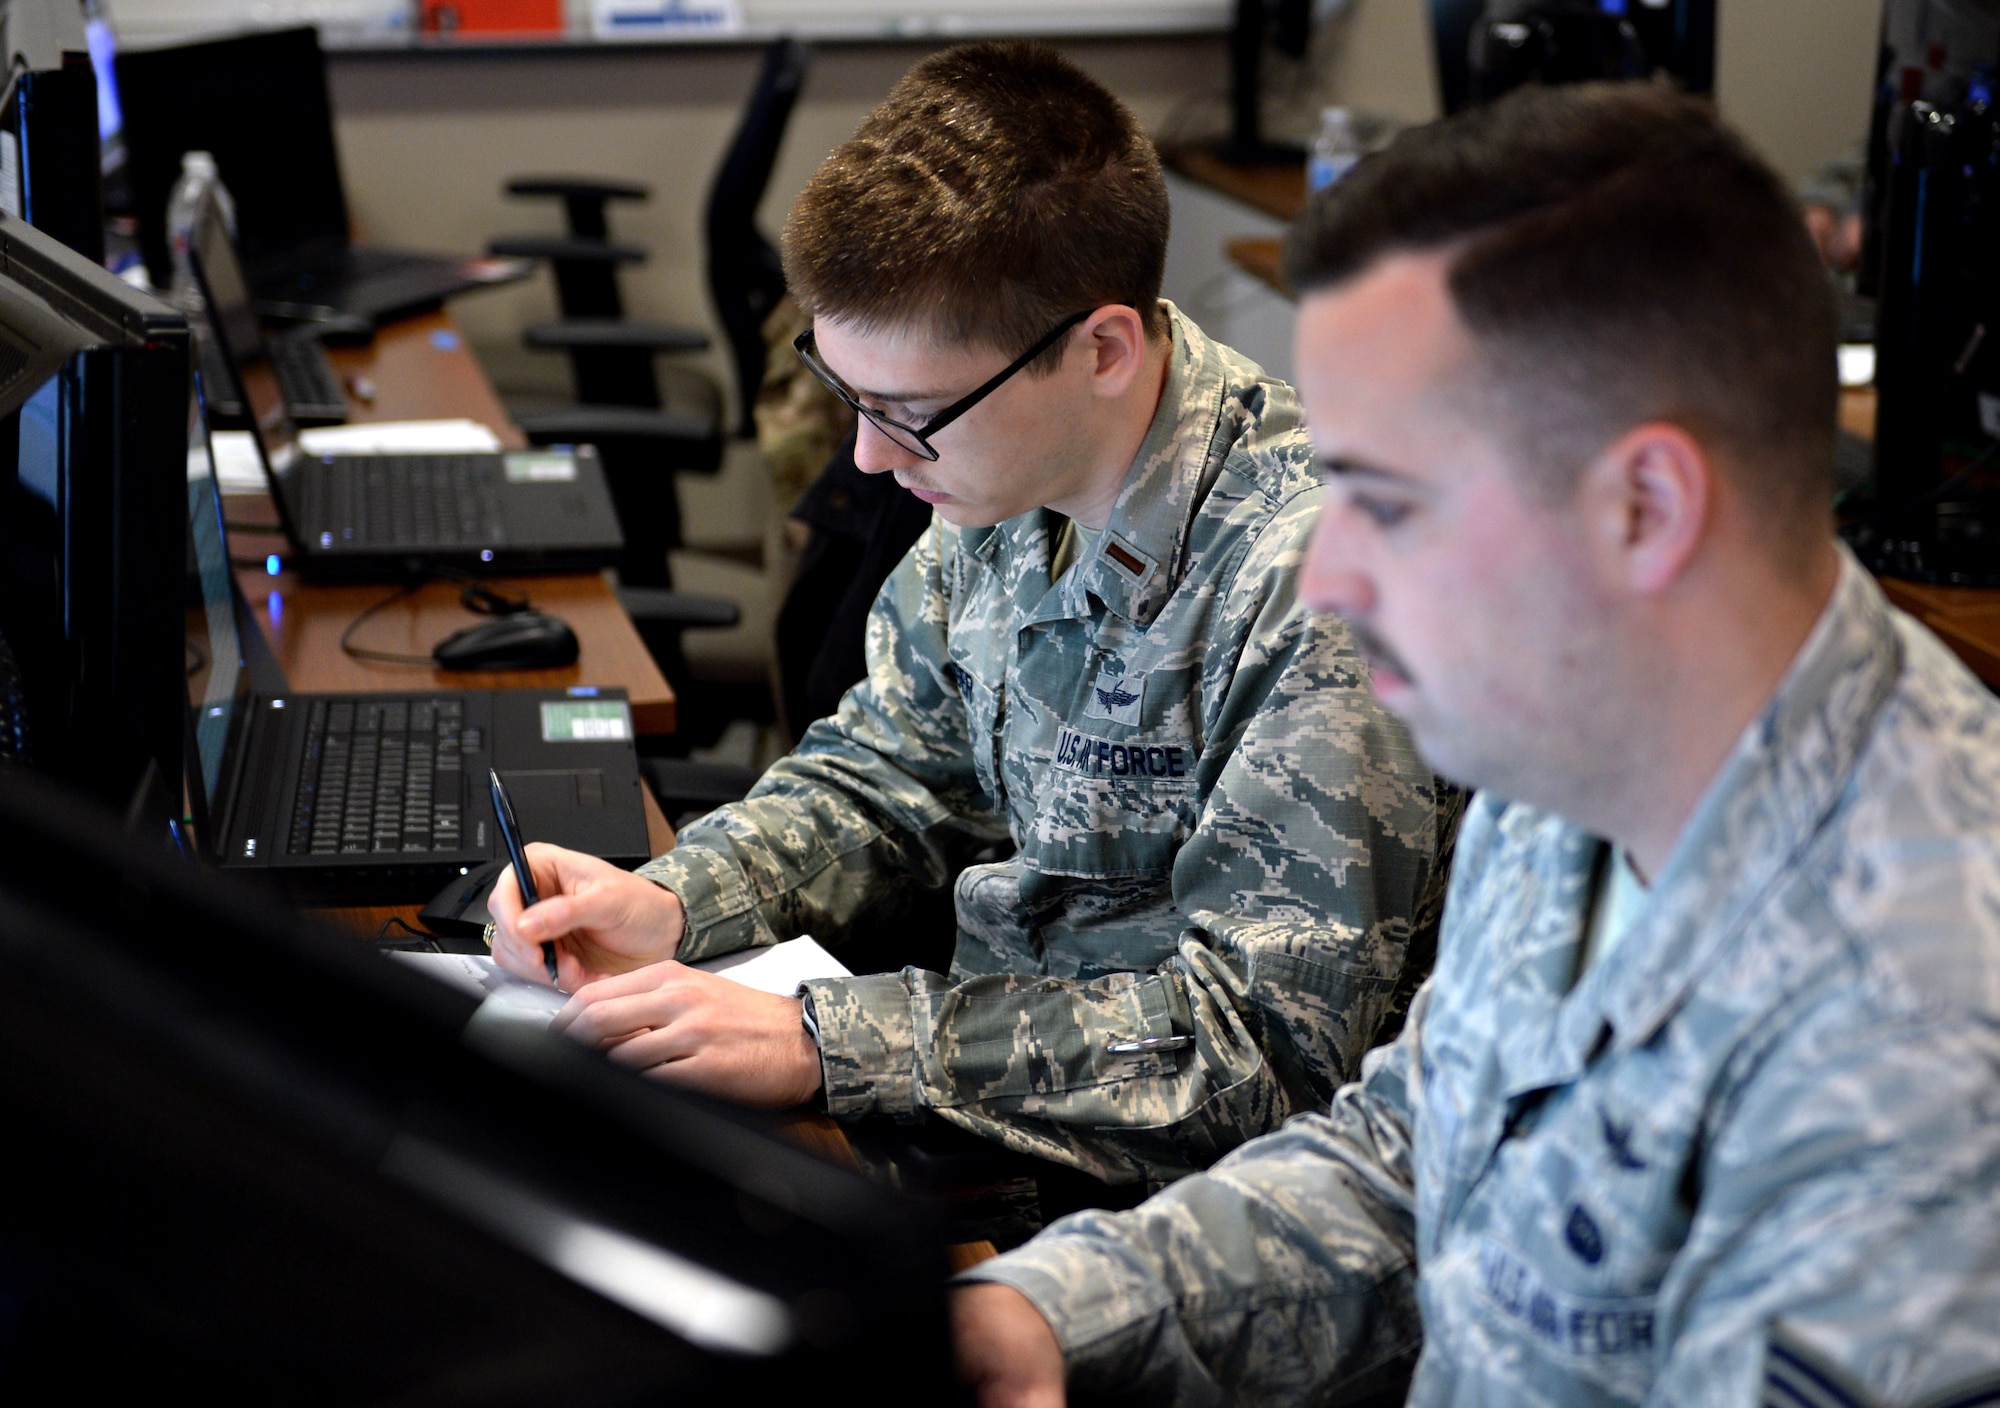 Members of the 833rd Cyberspace Operations Squadron participate in the monthly 567th Cyberspace Operations Group “hunt exercise” at Joint Base San Antonio-Lackland, Texas, March 21, 2019. The three-day exercise afforded teams from the 90th, 92nd, 833rd and 834th COSs, as well as the Air Force Office of Special Investigations, the opportunity to defend against an enemy within a virtual training network. (U.S. Air Force photo by Tech. Sgt. R.J. Biermann)